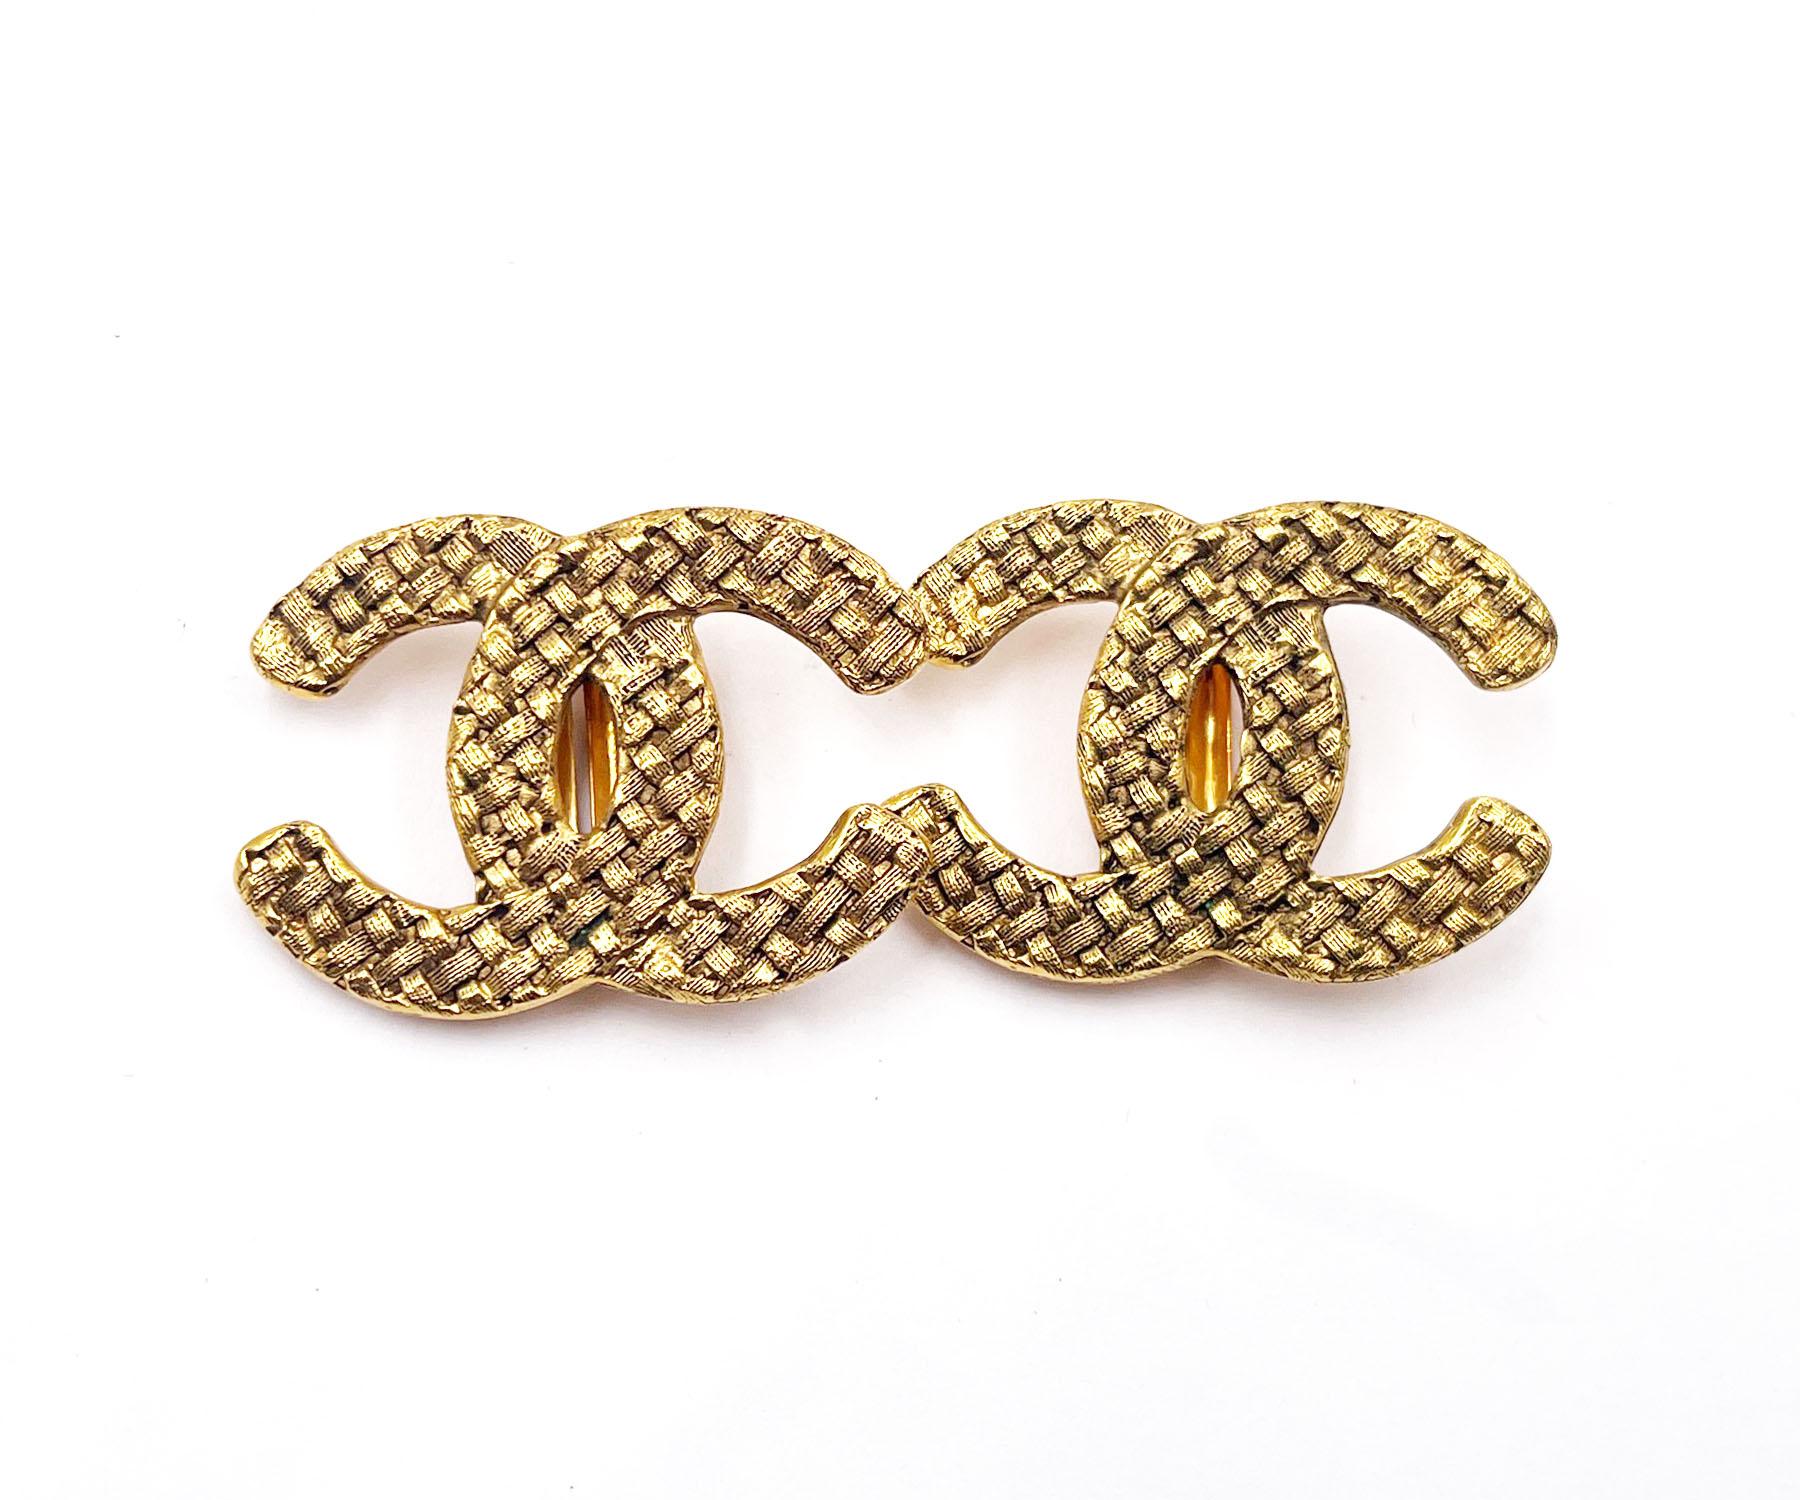 Chanel Vintage Gold Plated CC Basket Weave Large Clip on Earrings

* Marked 29 and 2878
* Made in France
* Comes with the original box

-It is approximately 1